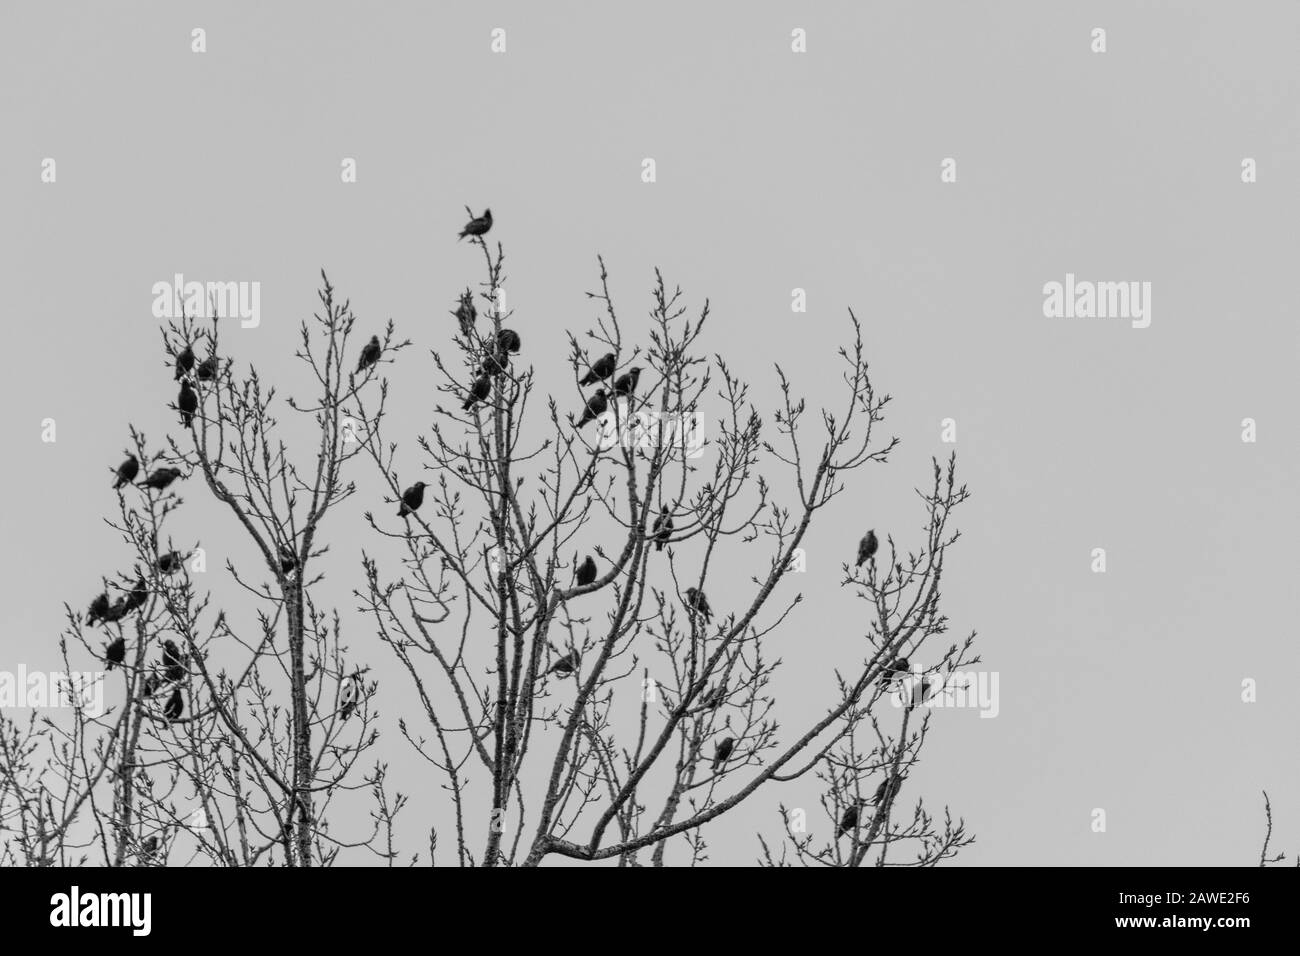 many small birds  sit high in a tree crown black and white Stock Photo